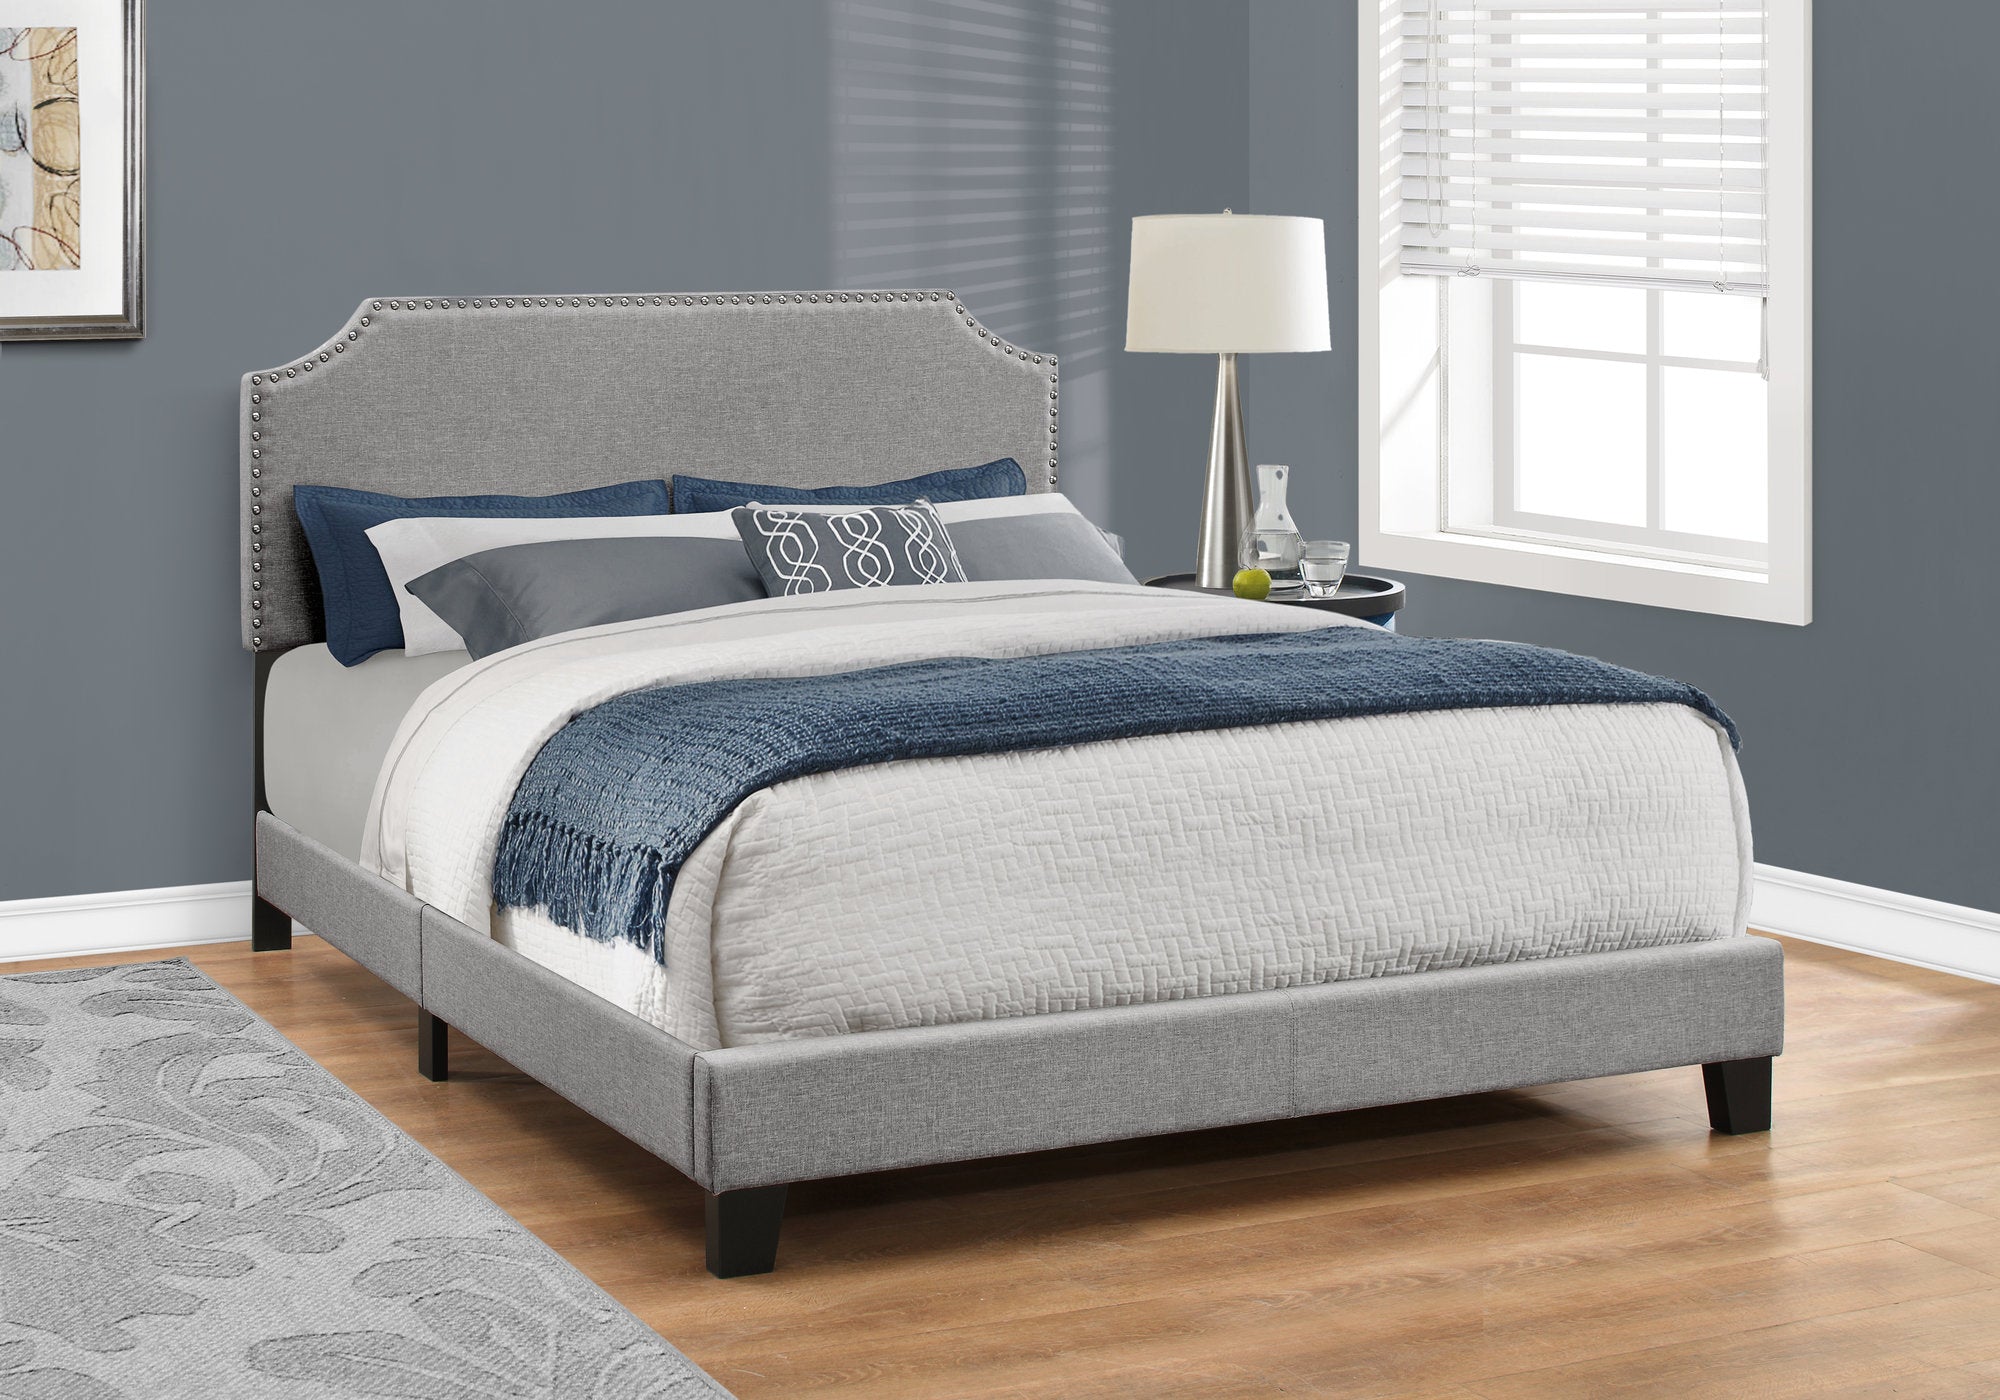 bed queen size grey linen with chrome trim i5925q